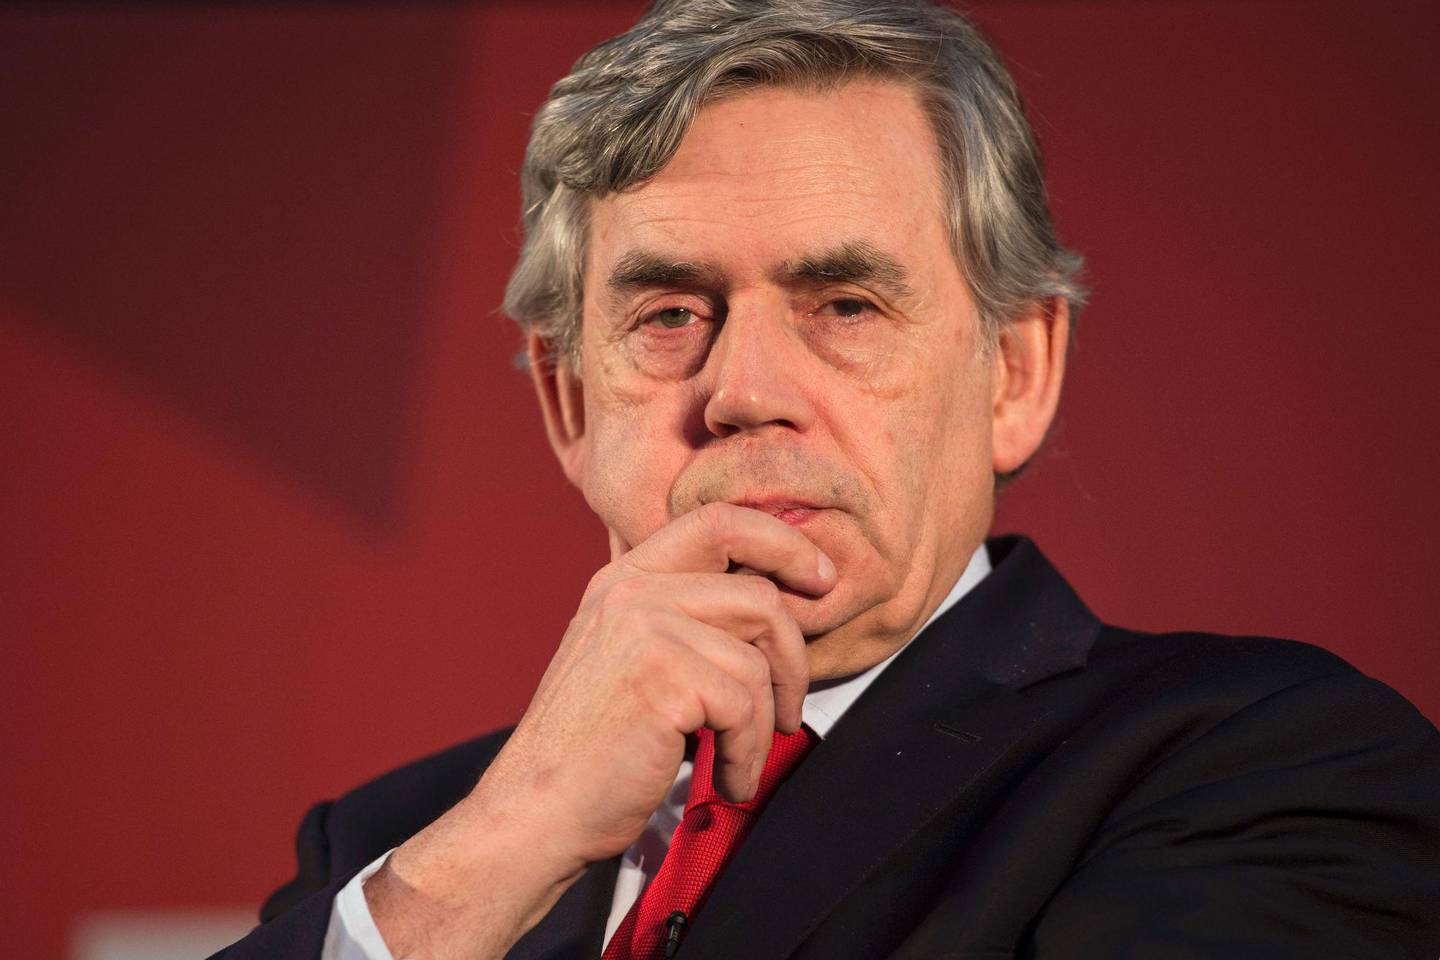 Former British Prime Minister Gordon Brown listens to speeches at a 'Labour IN' event promoting the case to remain in the EU, in The Union building of Manchester Metropolitan University in Manchester, northern England on June 16, 2016.  / AFP PHOTO / OLI SCARFF